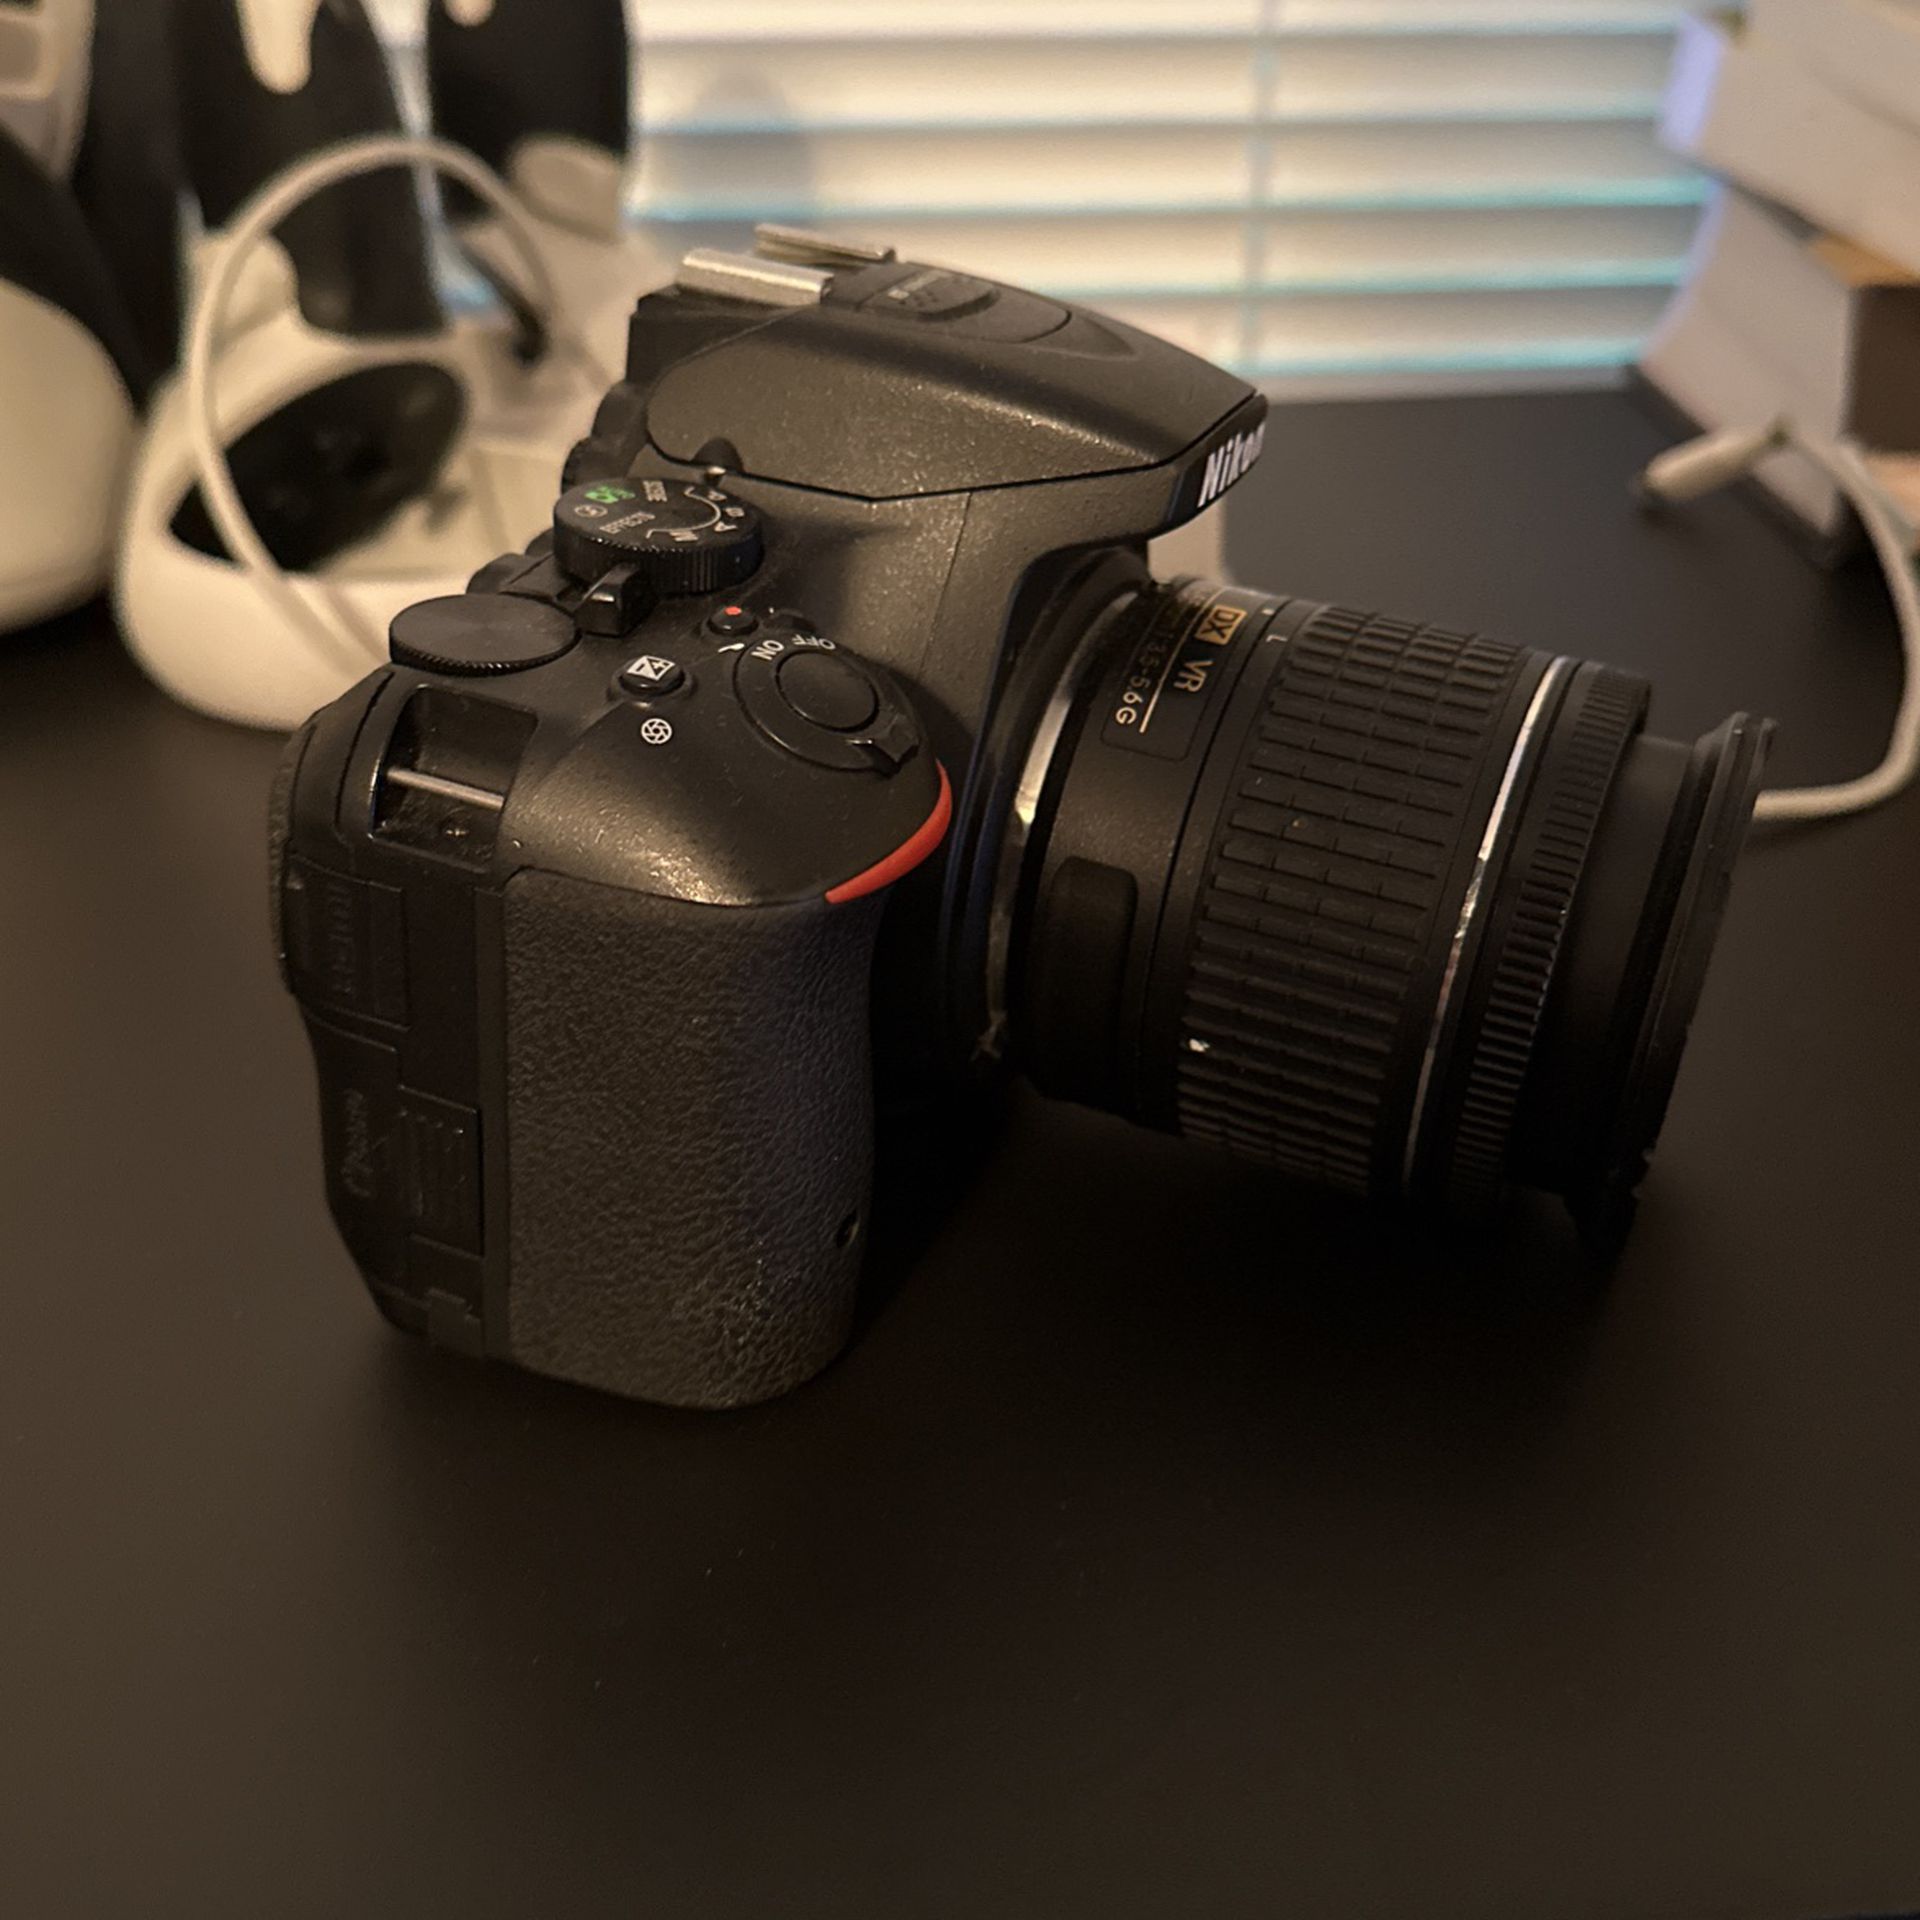 Nikon D5500 Camera (Doesn’t Work) Use For Parts